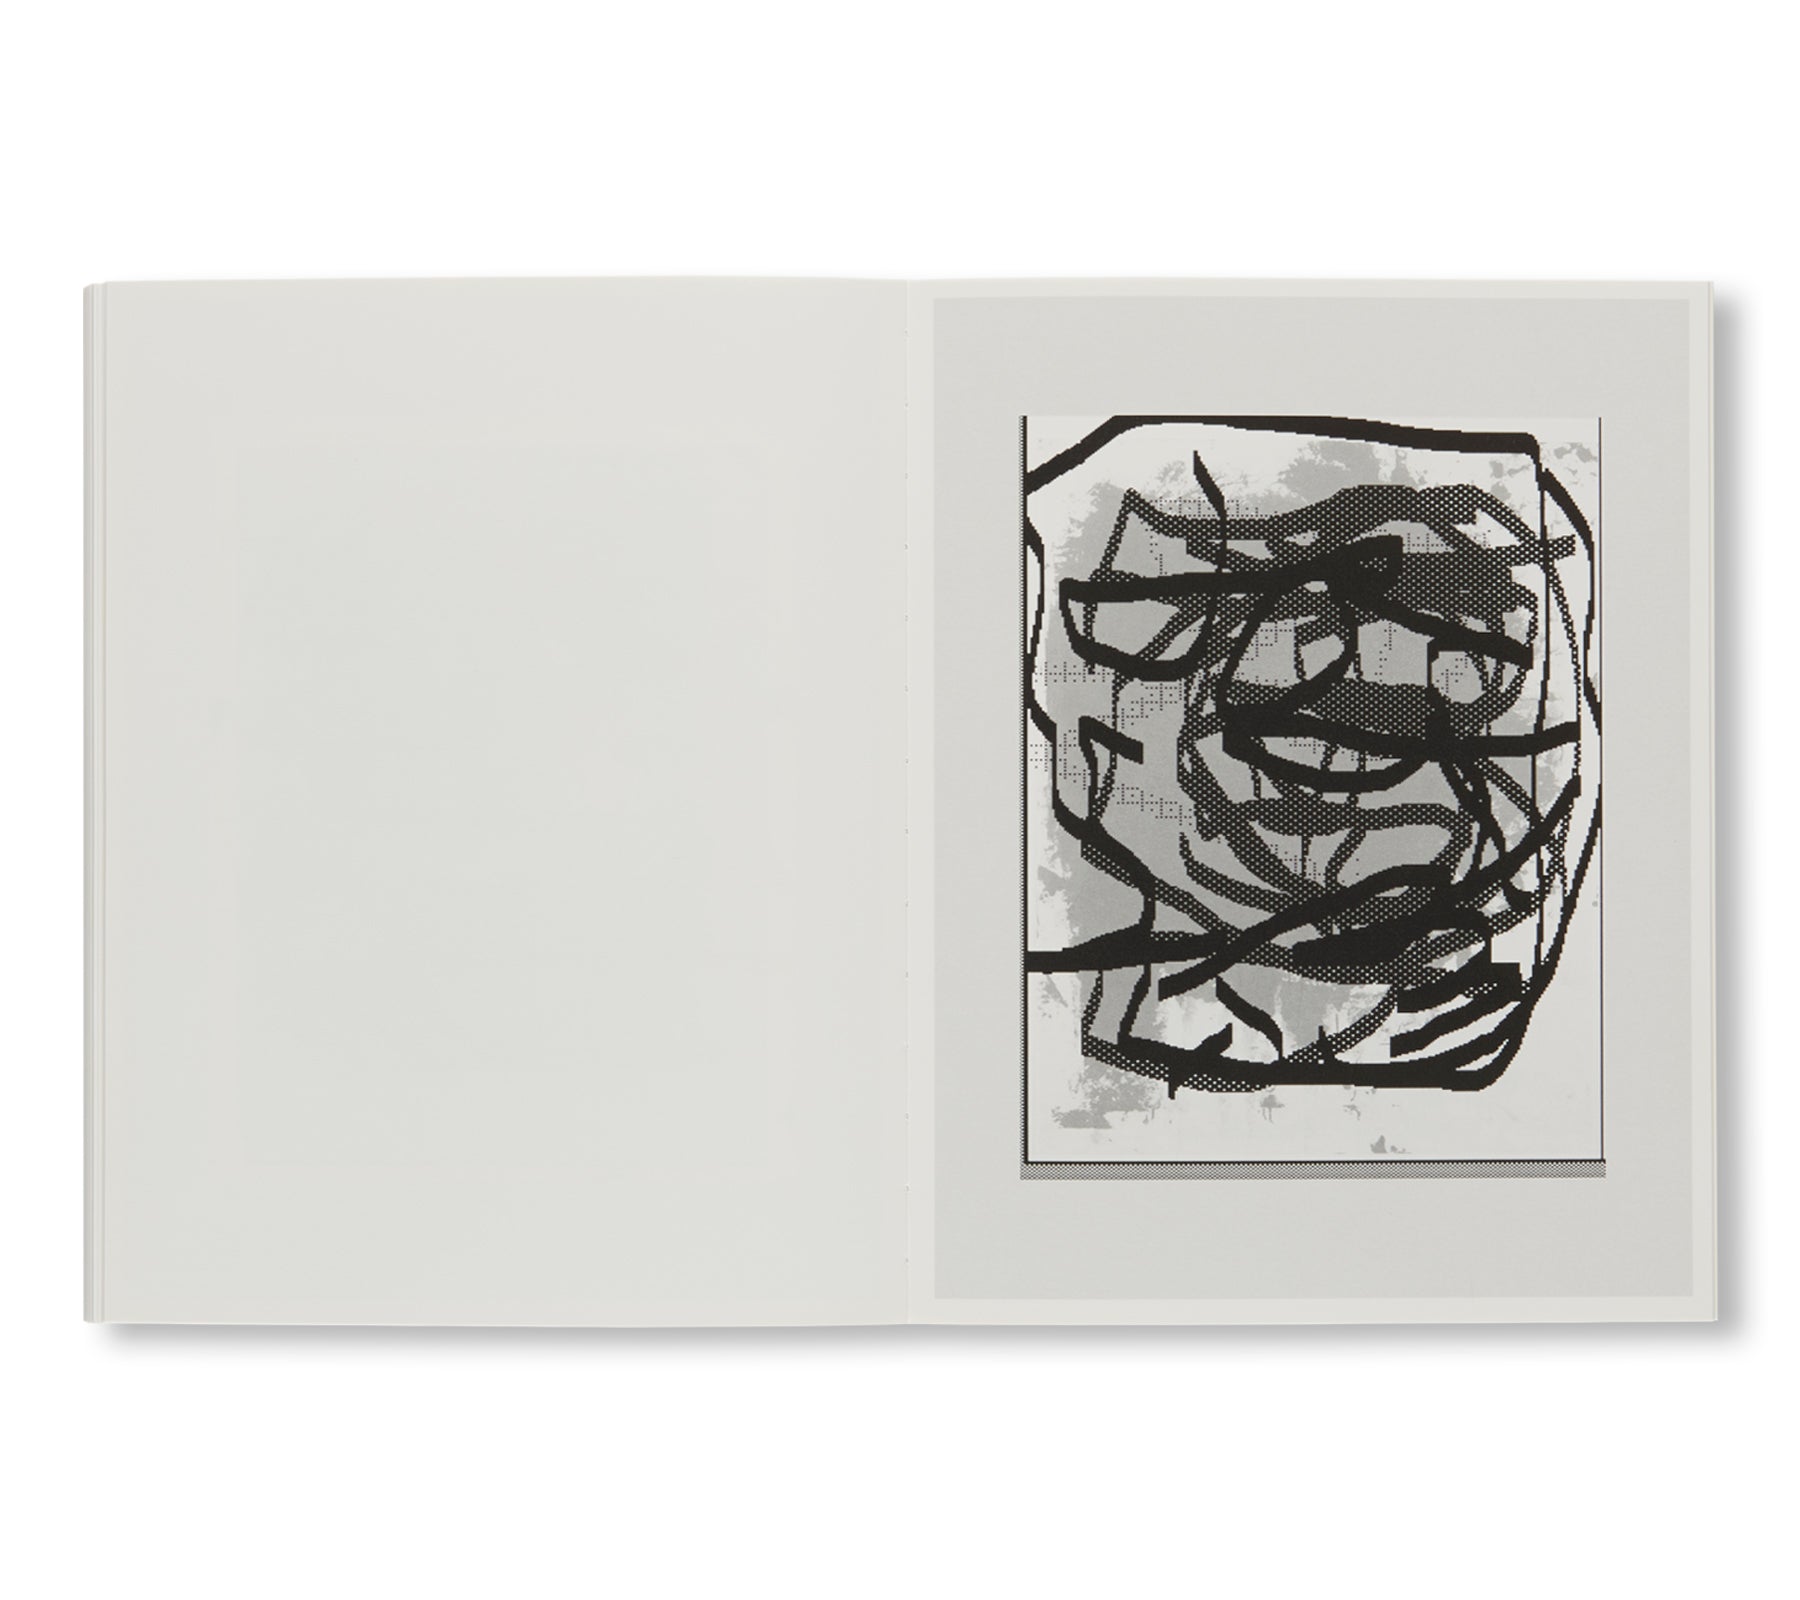 CAN YOUR MONKEY DO THE DOG by Josh Smith, Christopher Wool